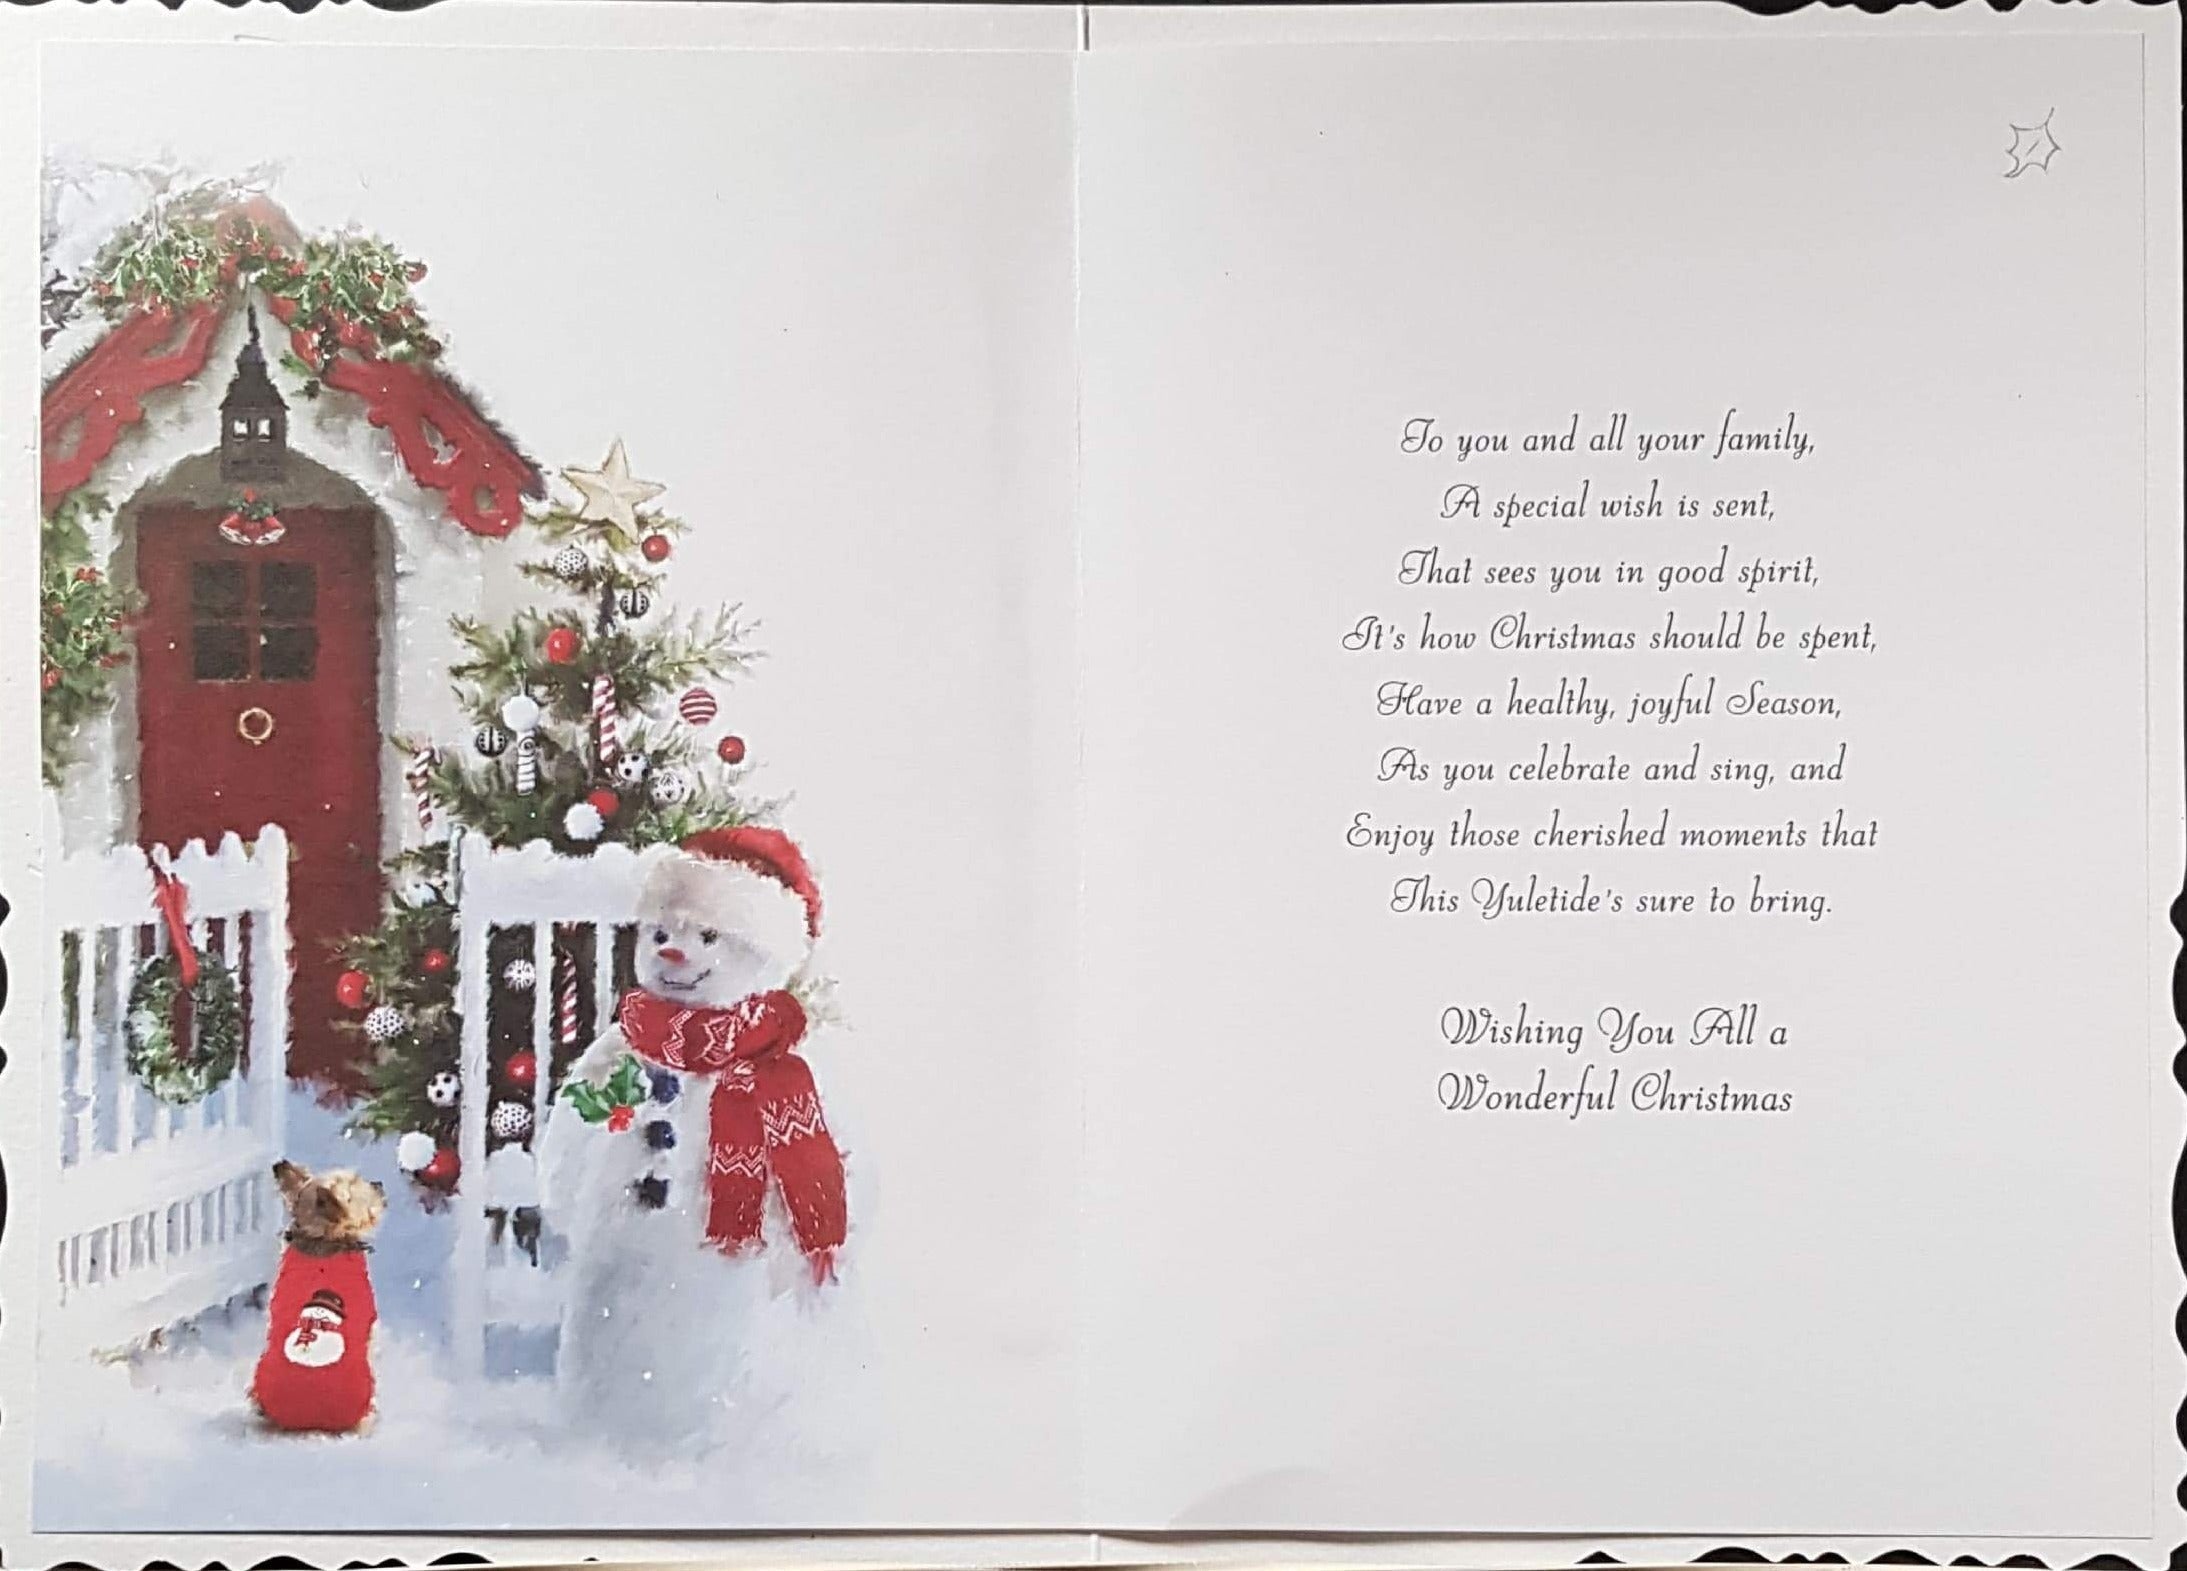 Family Christmas Card - Love and Christmas Wishes & Dog & Snowman & Red Front Door